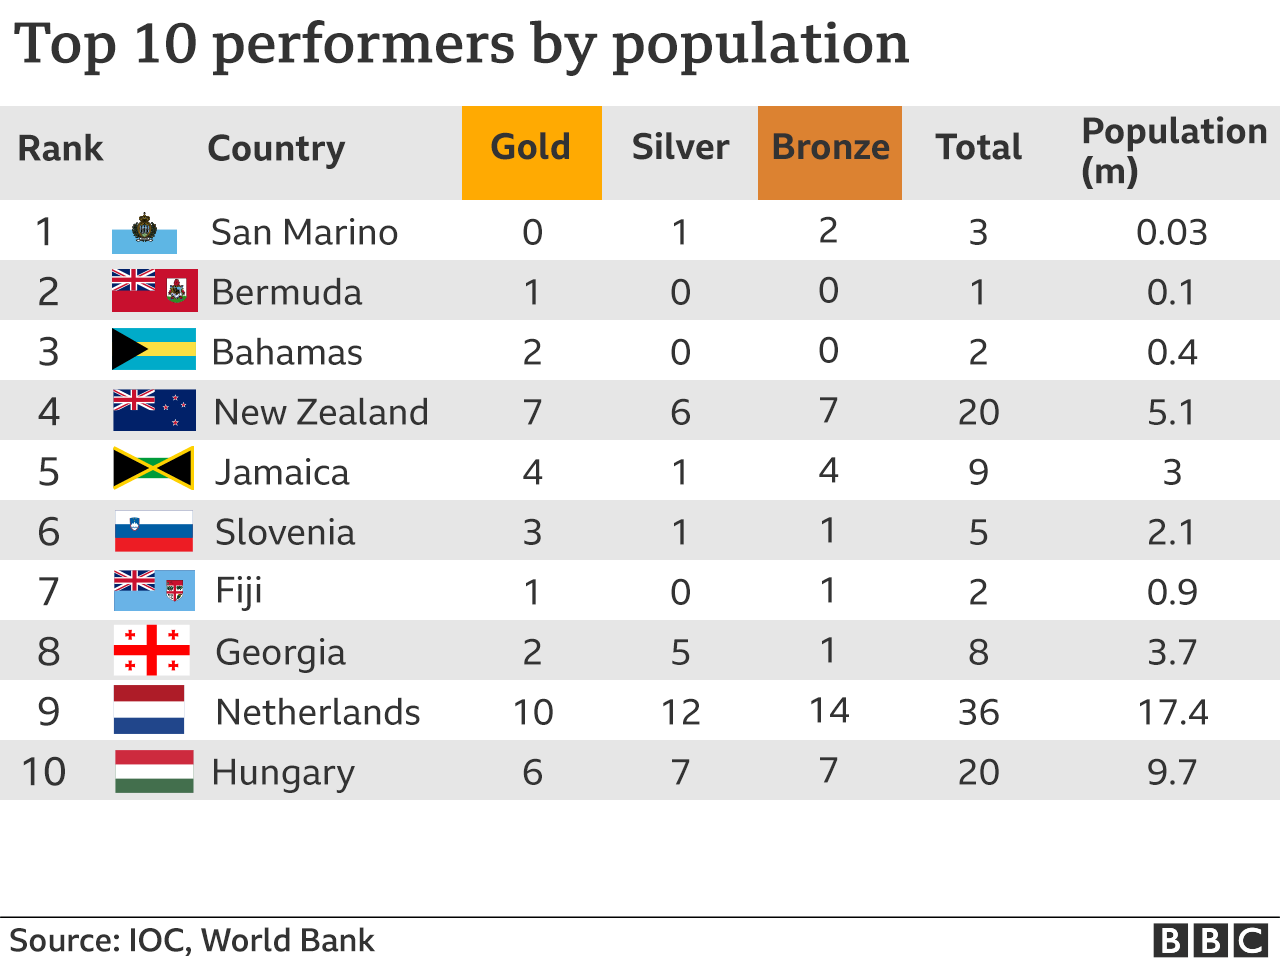 Table ranks countries by medals per million population with San Marino at the top